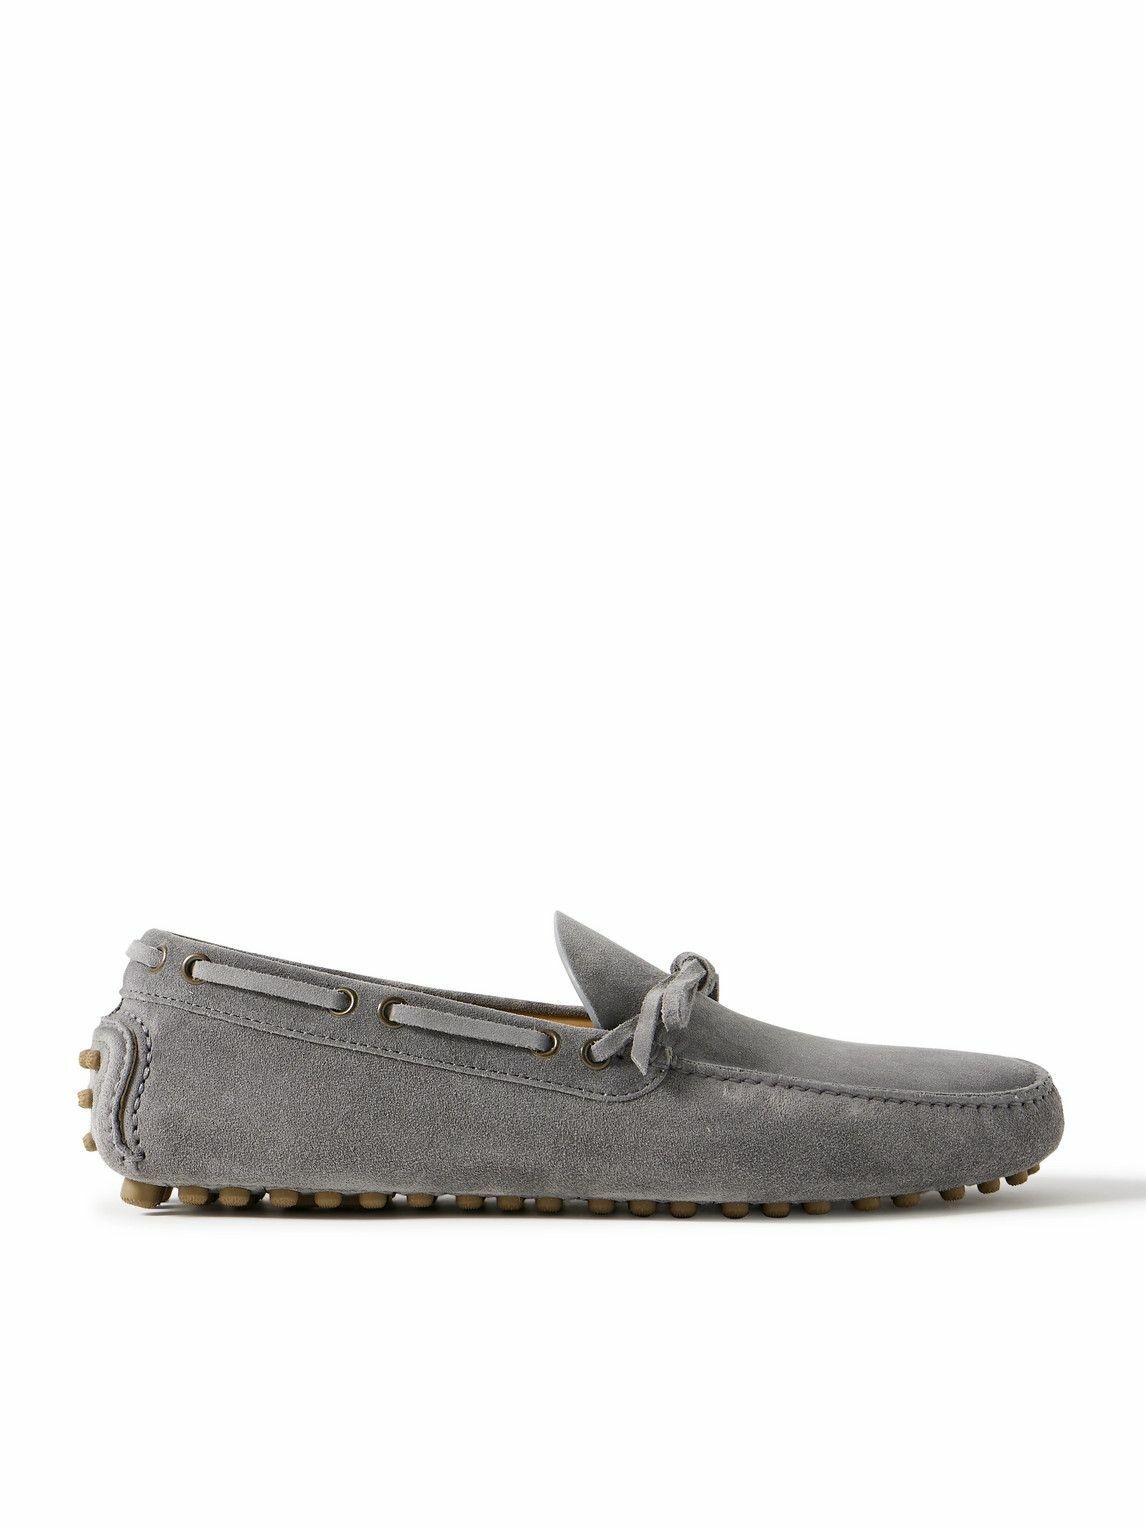 Photo: Brunello Cucinelli - Suede Driving Shoes - Gray